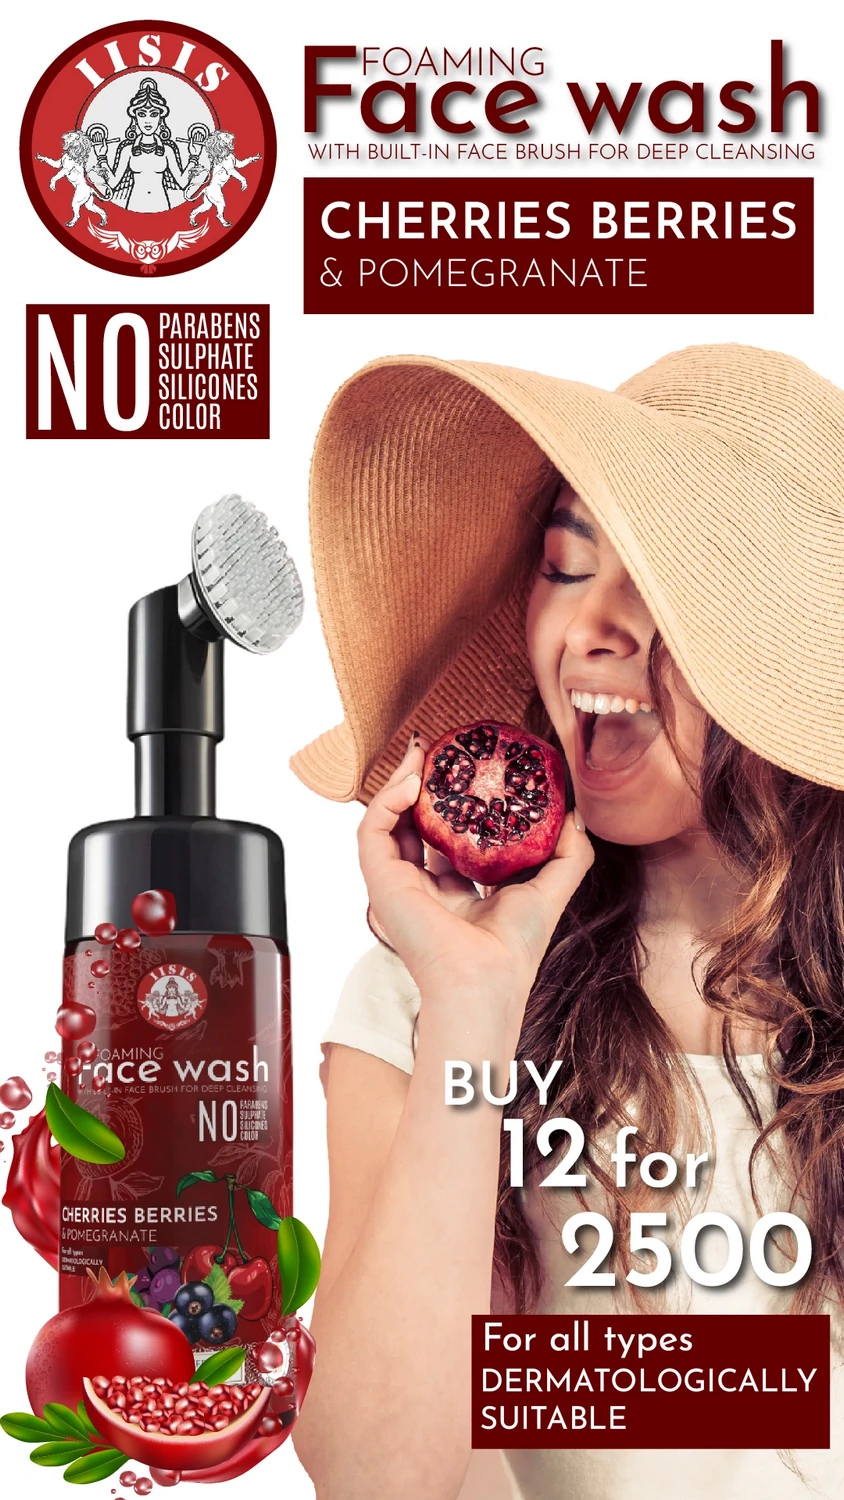 RBV B2B Cherries Berries & Pomegranate Foaming Face Wash With Built-In Face Brush (150ml)- 12 Pcs.